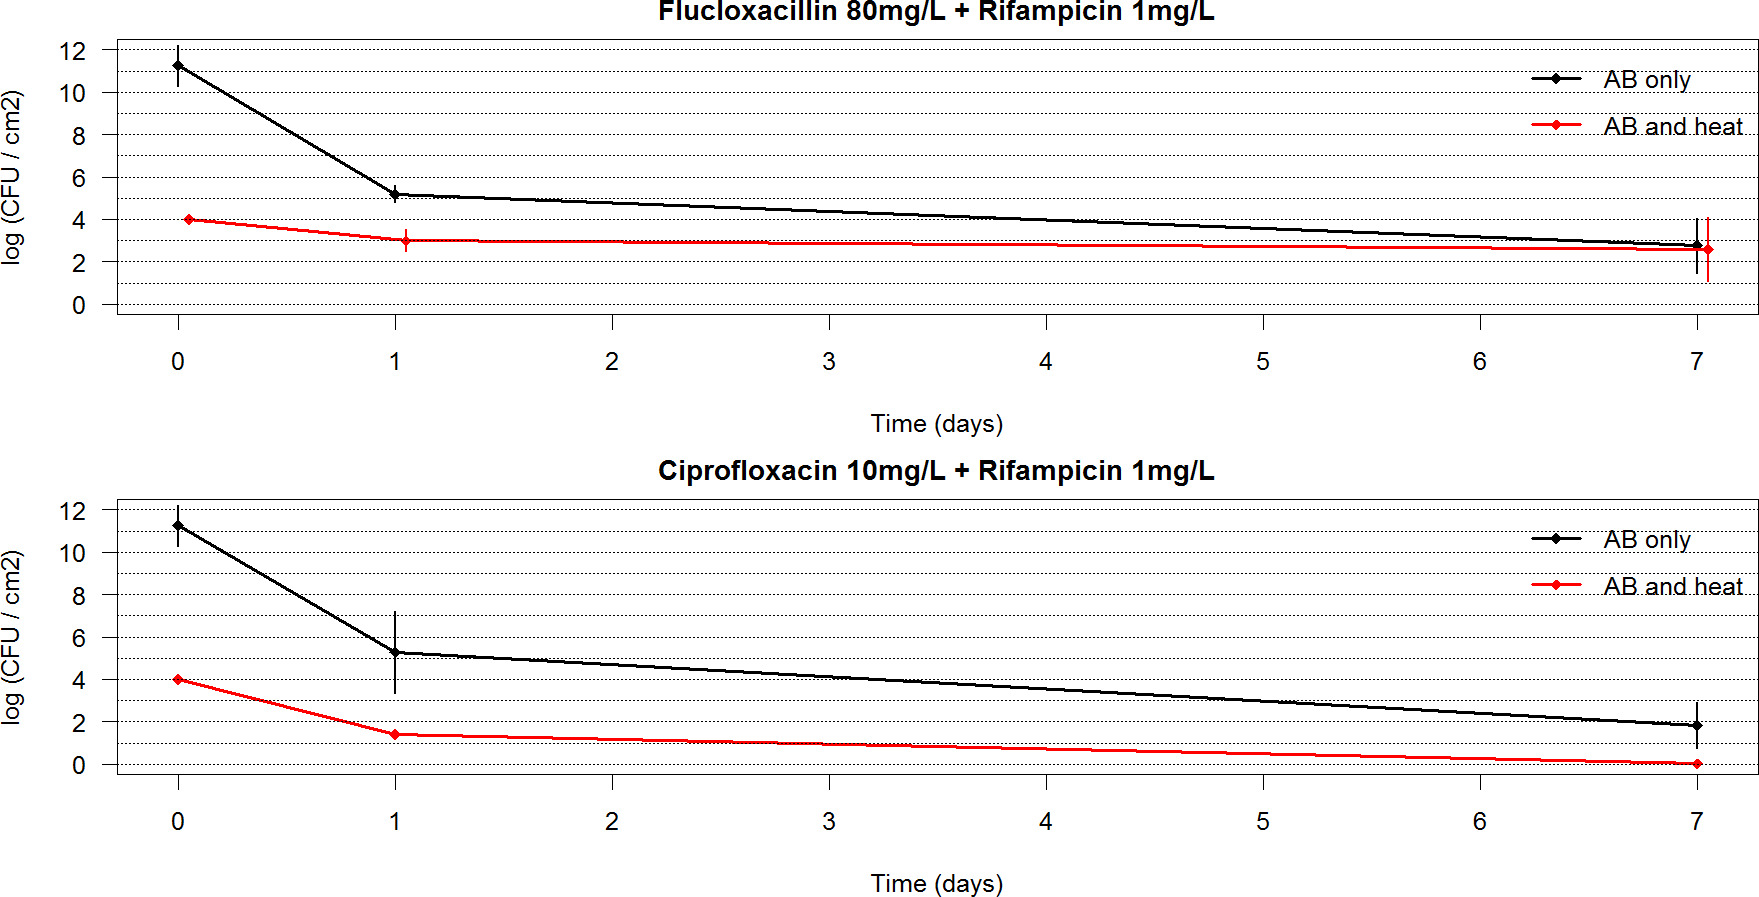 Fig. 6 
            Seven- to 14-day biofilms: graph showing the log colony-forming units (CFUs) that remain for seven-day Staphylococcus aureus biofilms after 24 hours, and seven-day exposure to antibiotics with (red) or without (black) induction heating to 60°C for one minute. The combination of induction heating and ciprofloxacin with rifampicin was synergistic, and this combination was the only one that fully eradicated the bacteria from the metal coupons. Means and 95% confidence intervals are presented. AB, antibiotics.
          